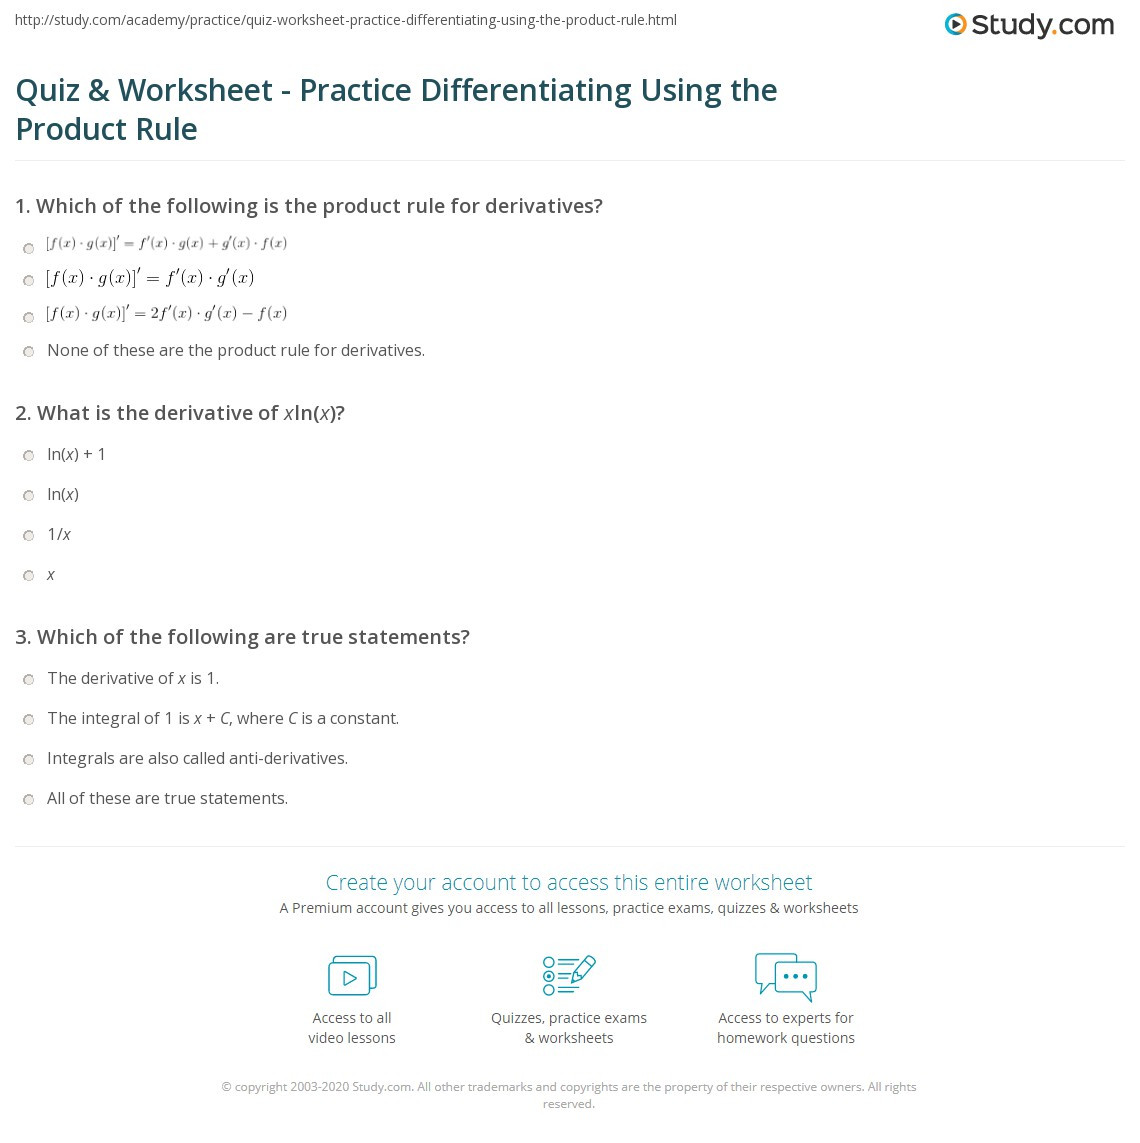 Product and Quotient Rule Worksheet Quiz &amp; Worksheet Practice Differentiating Using the